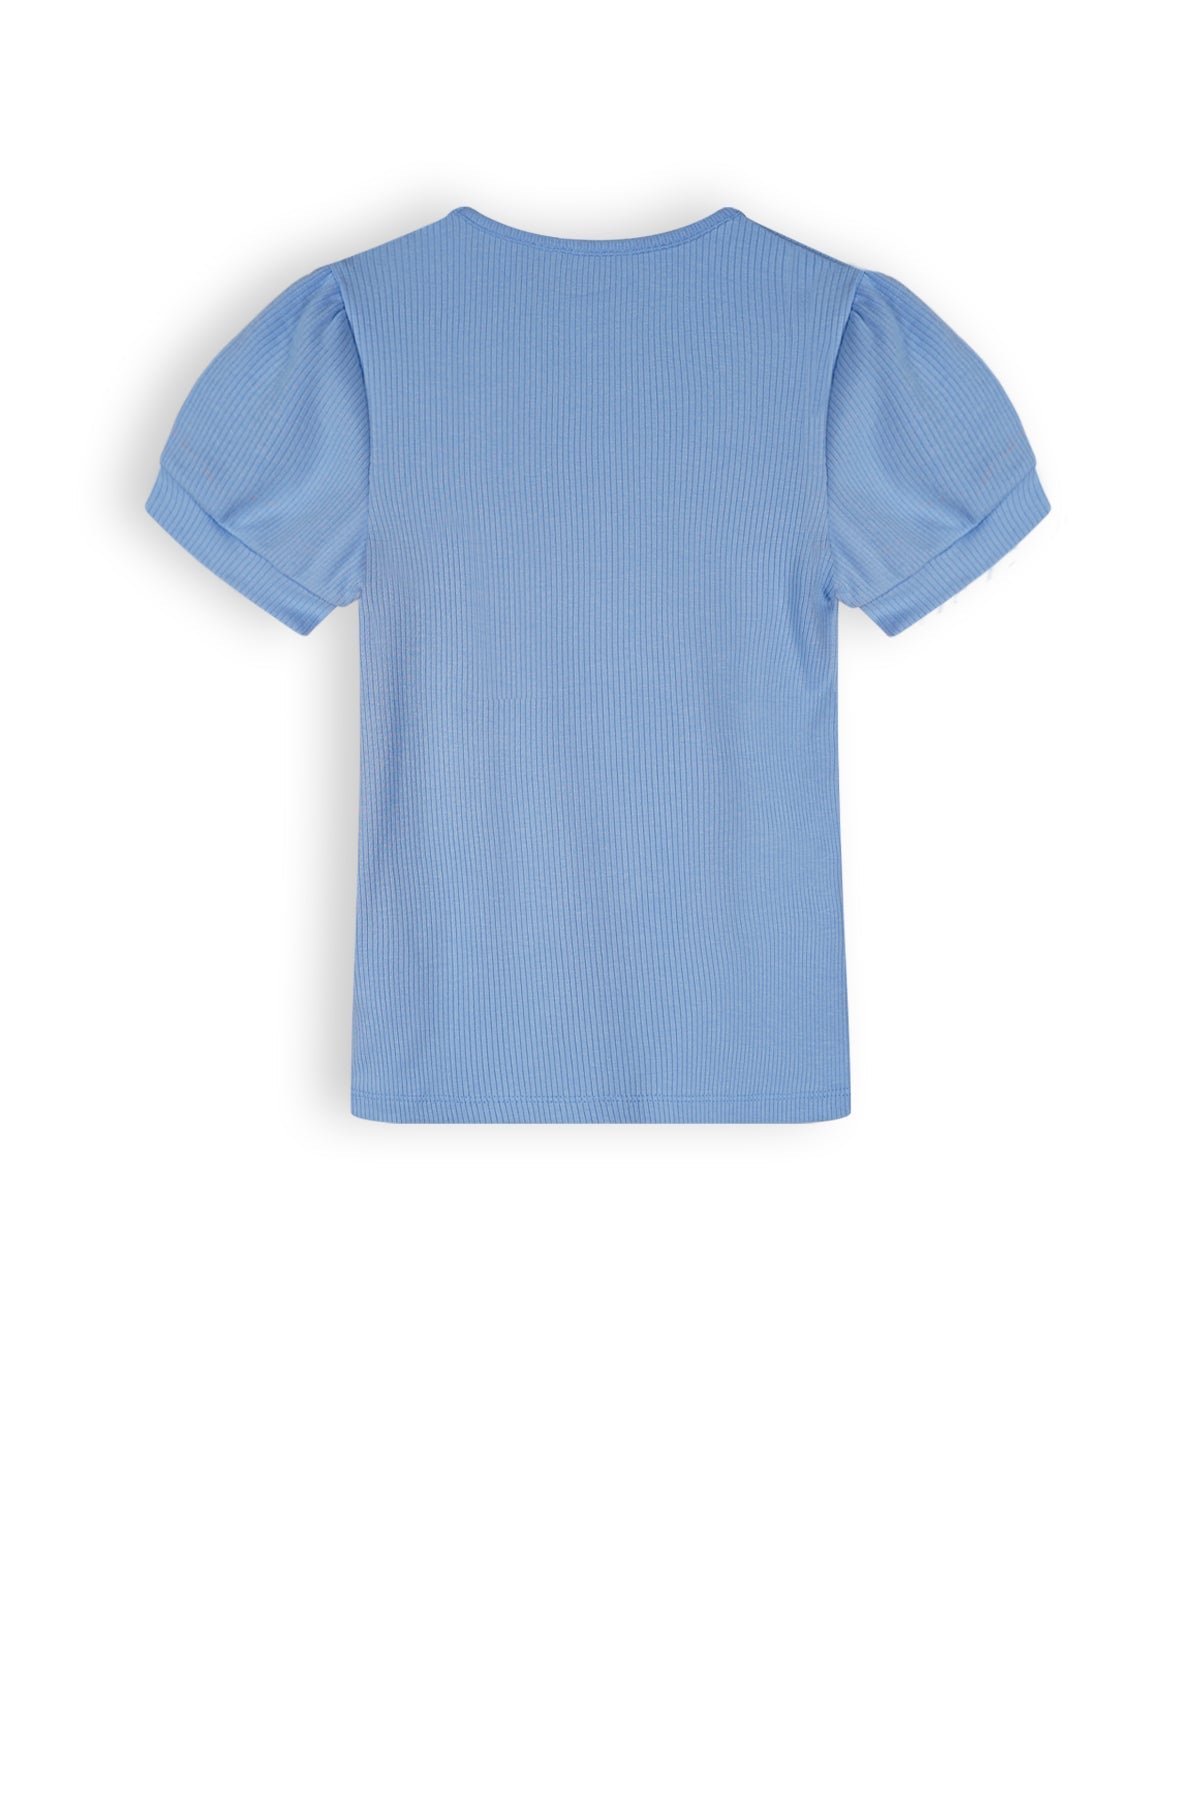 Meisjes Kyoto Girls Rib Tshirt S/Sl With Refined Artwork At Chest van NoNo in de kleur Provence Blue in maat 134-140.